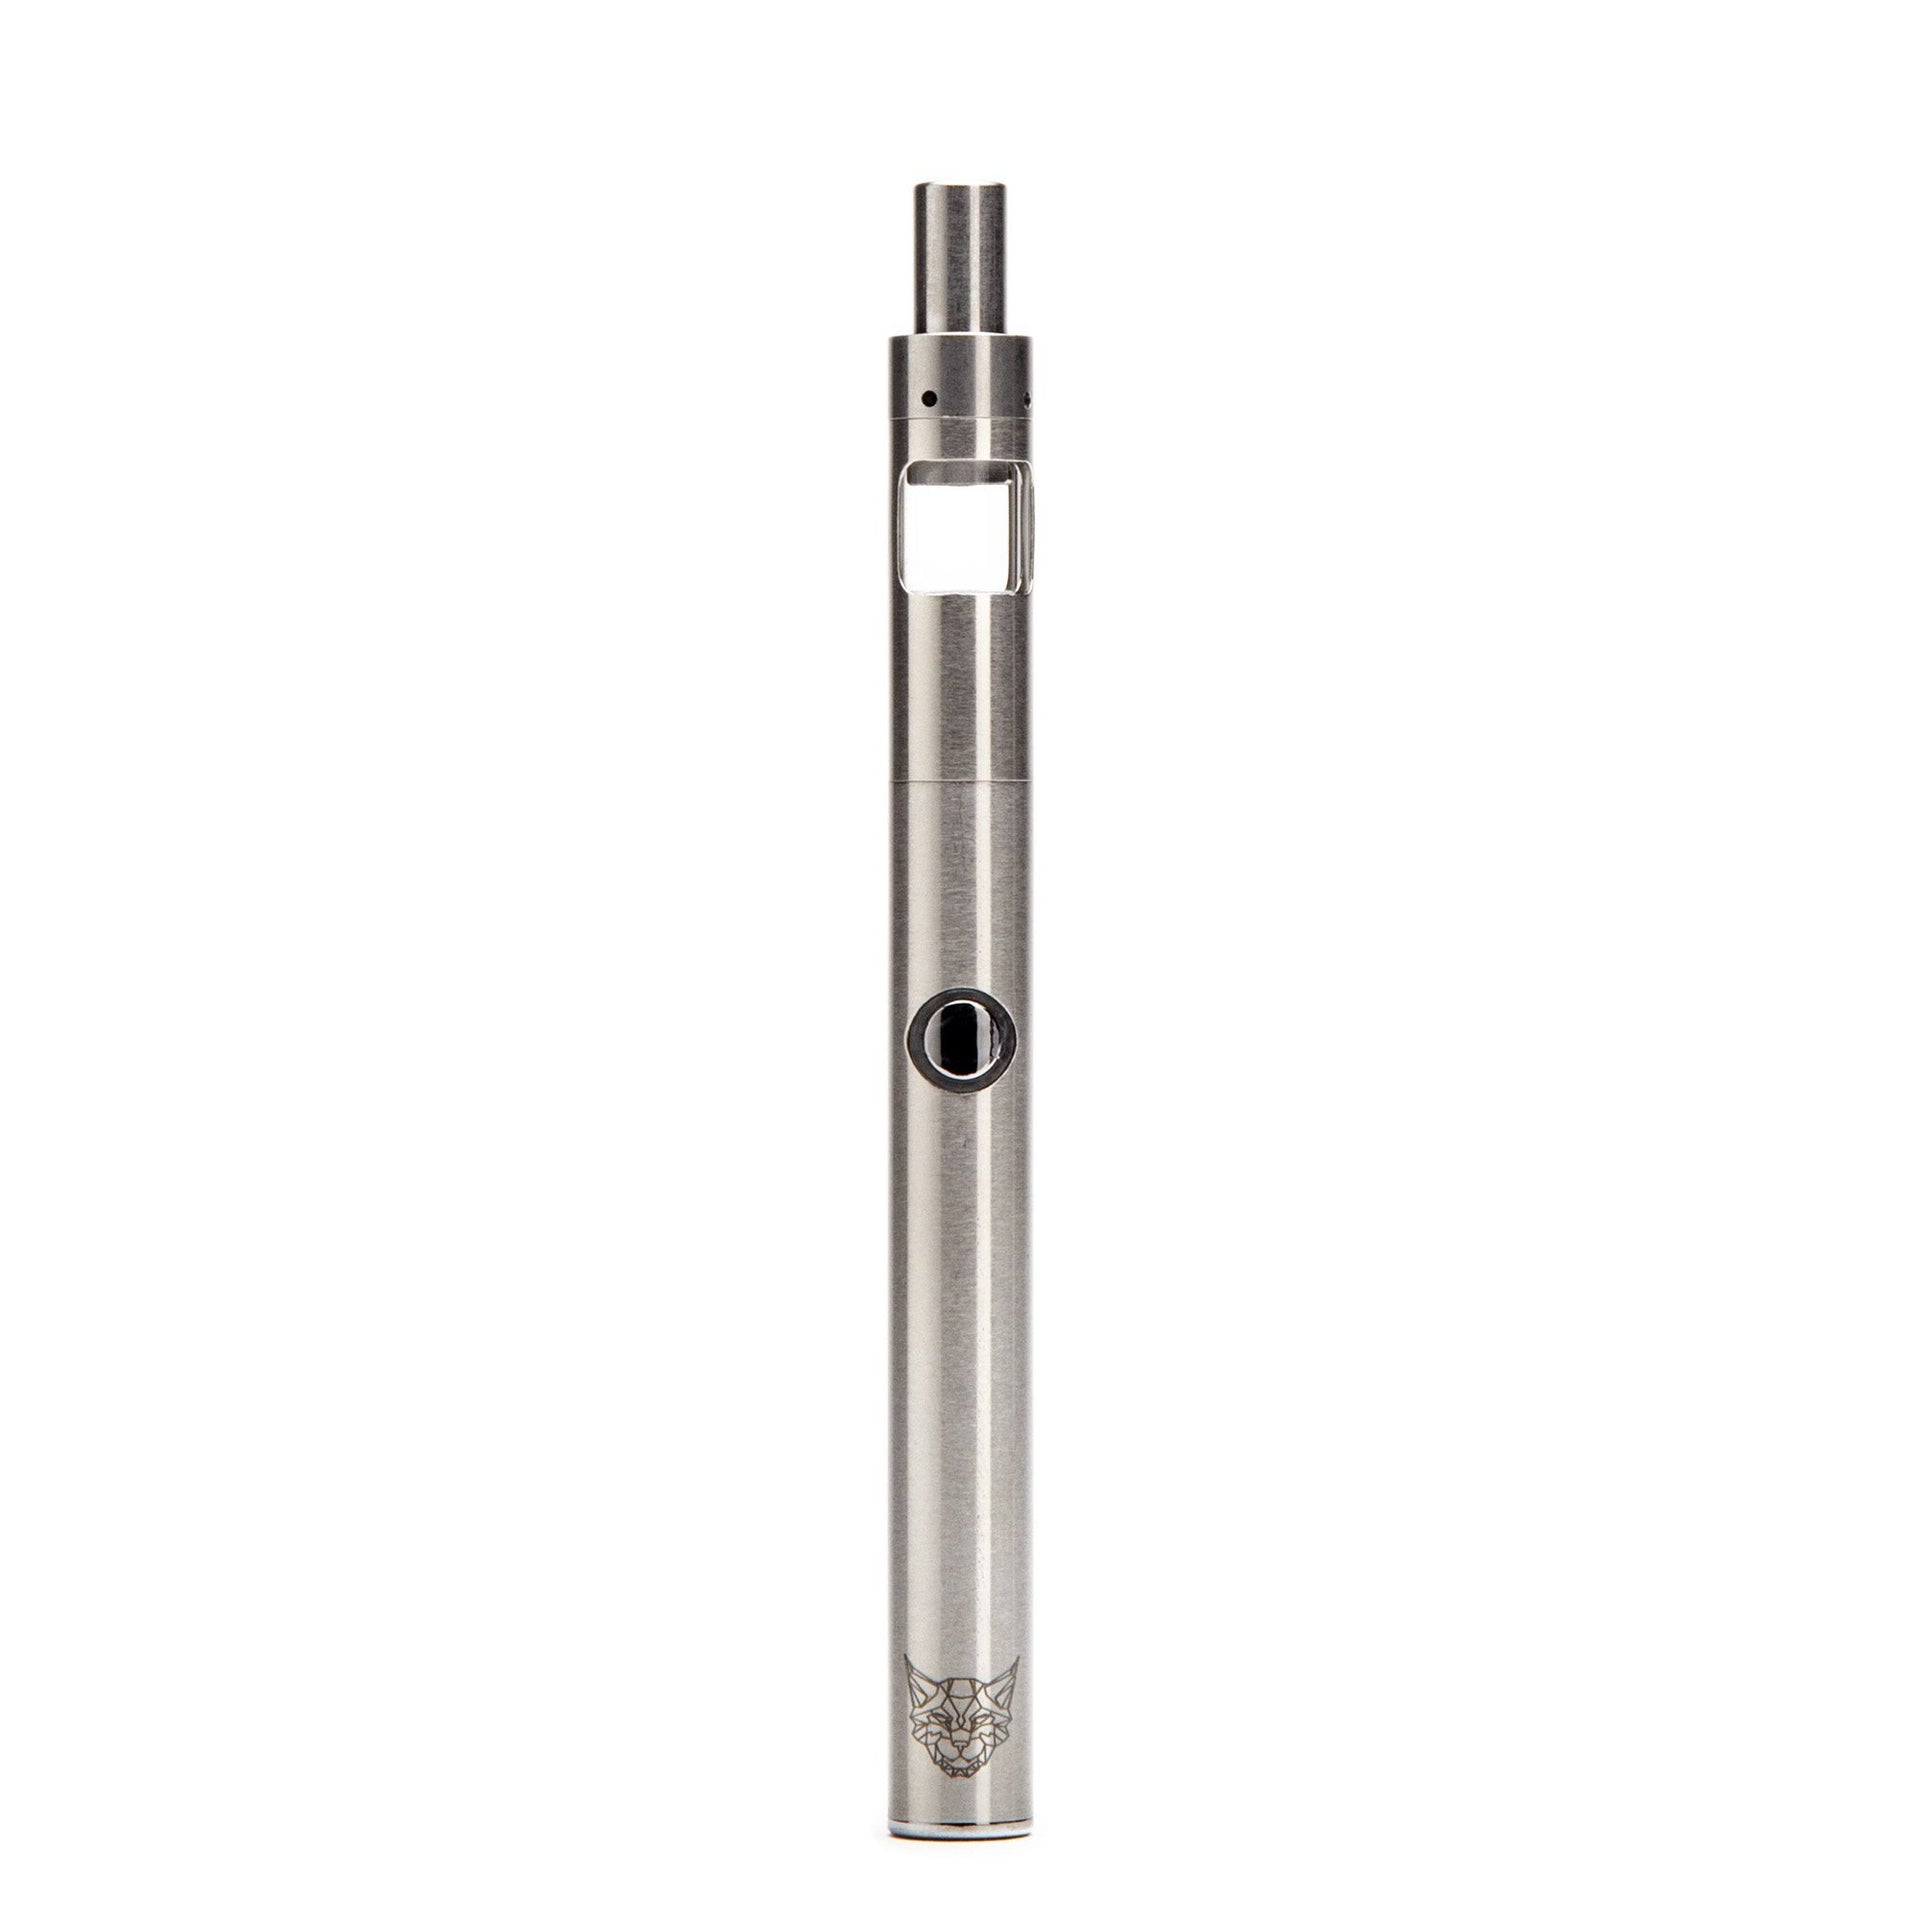 LINX Ember Dab Pen - 420 Science - The most trusted online smoke shop.